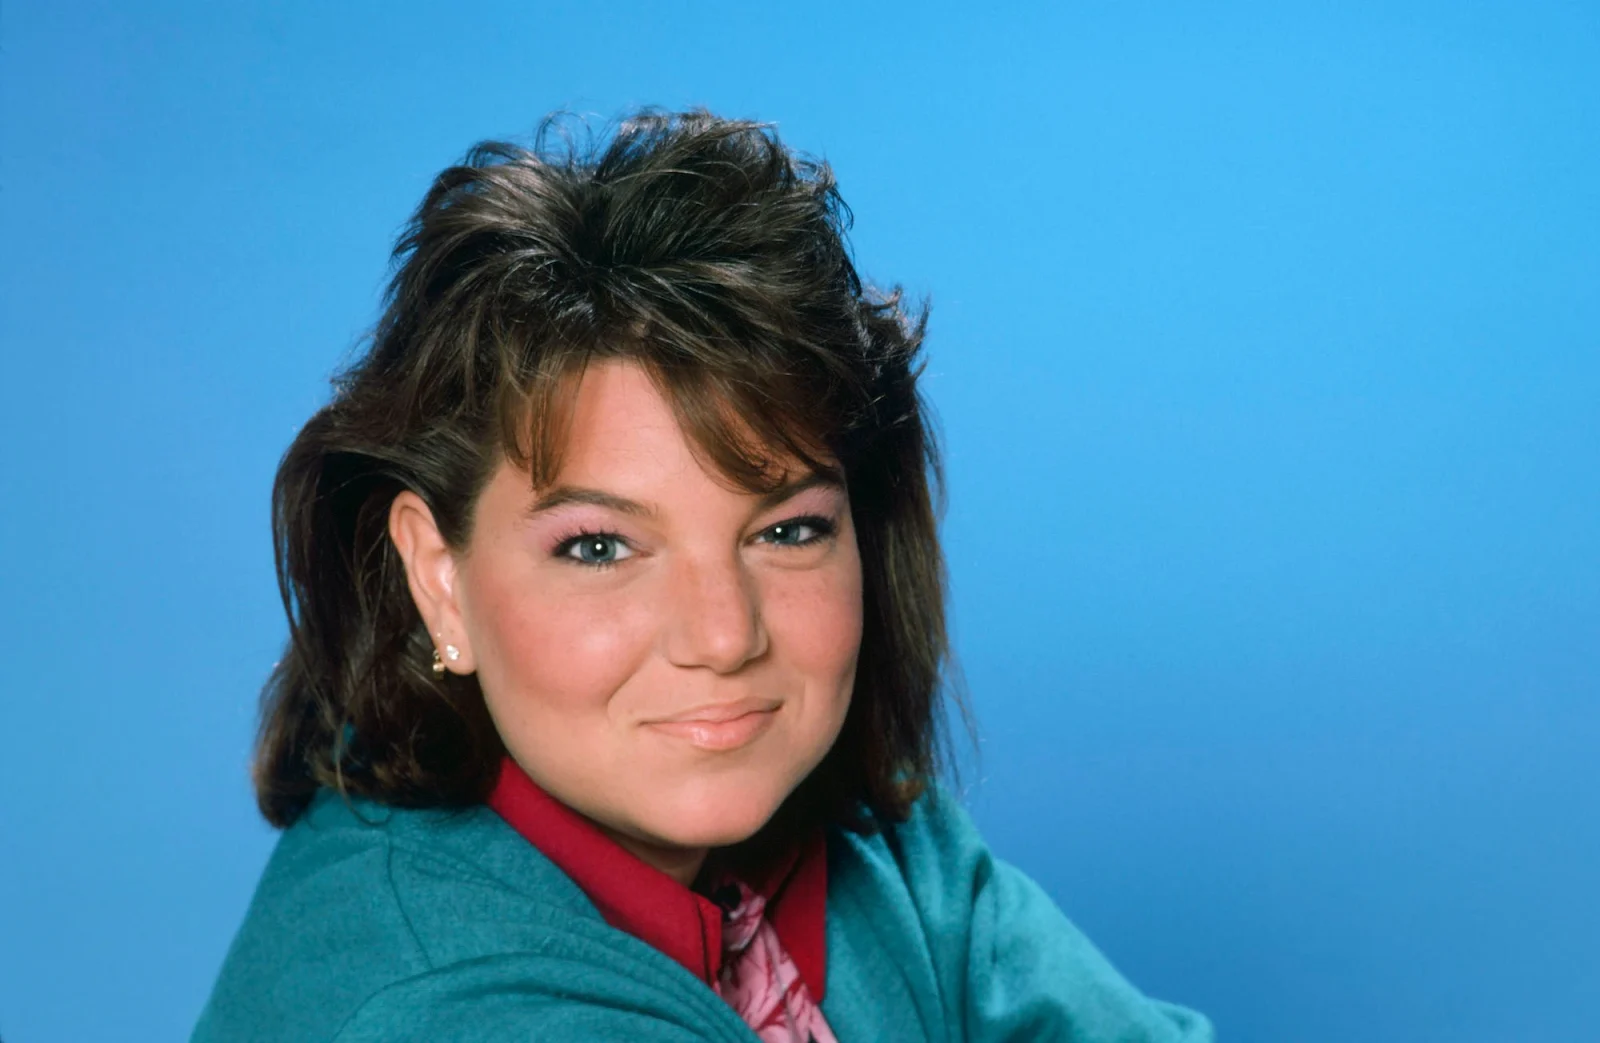 Mindy Cohn Biography Height Weight Age Movies Husband Family Salary Net Worth Facts More